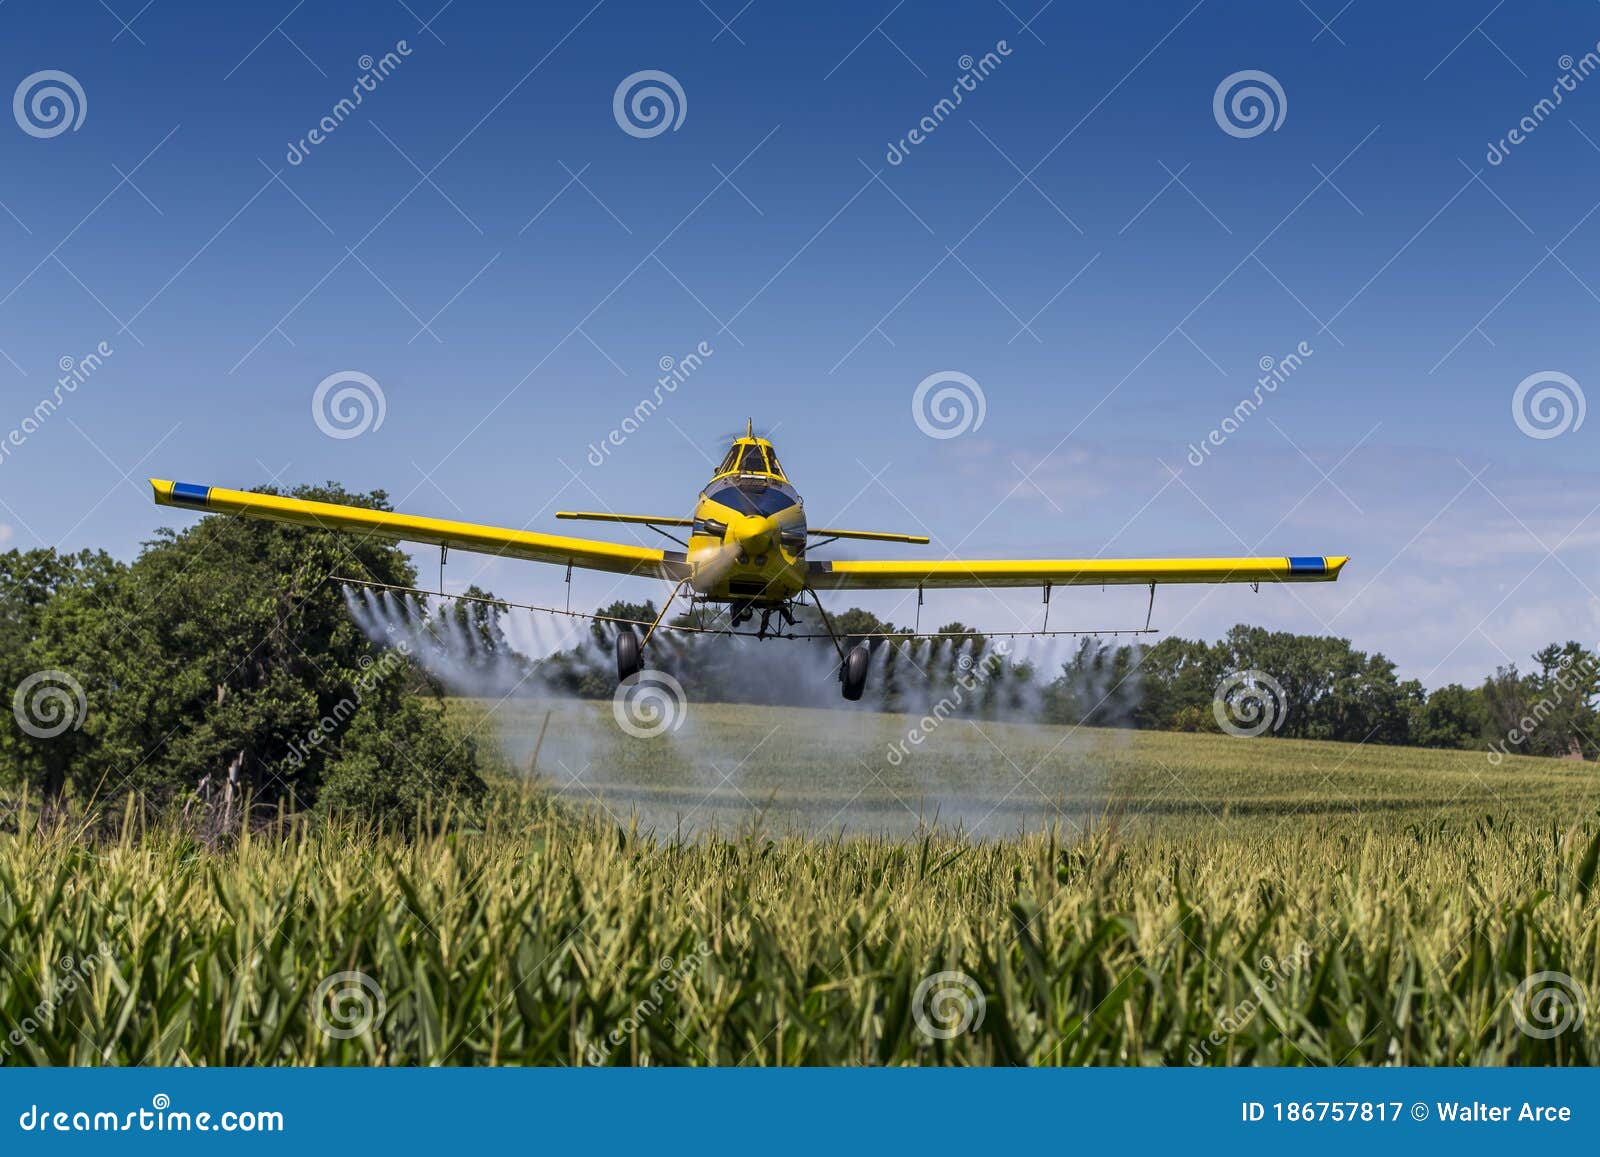 yellow crop duster spraying pestisides on crops